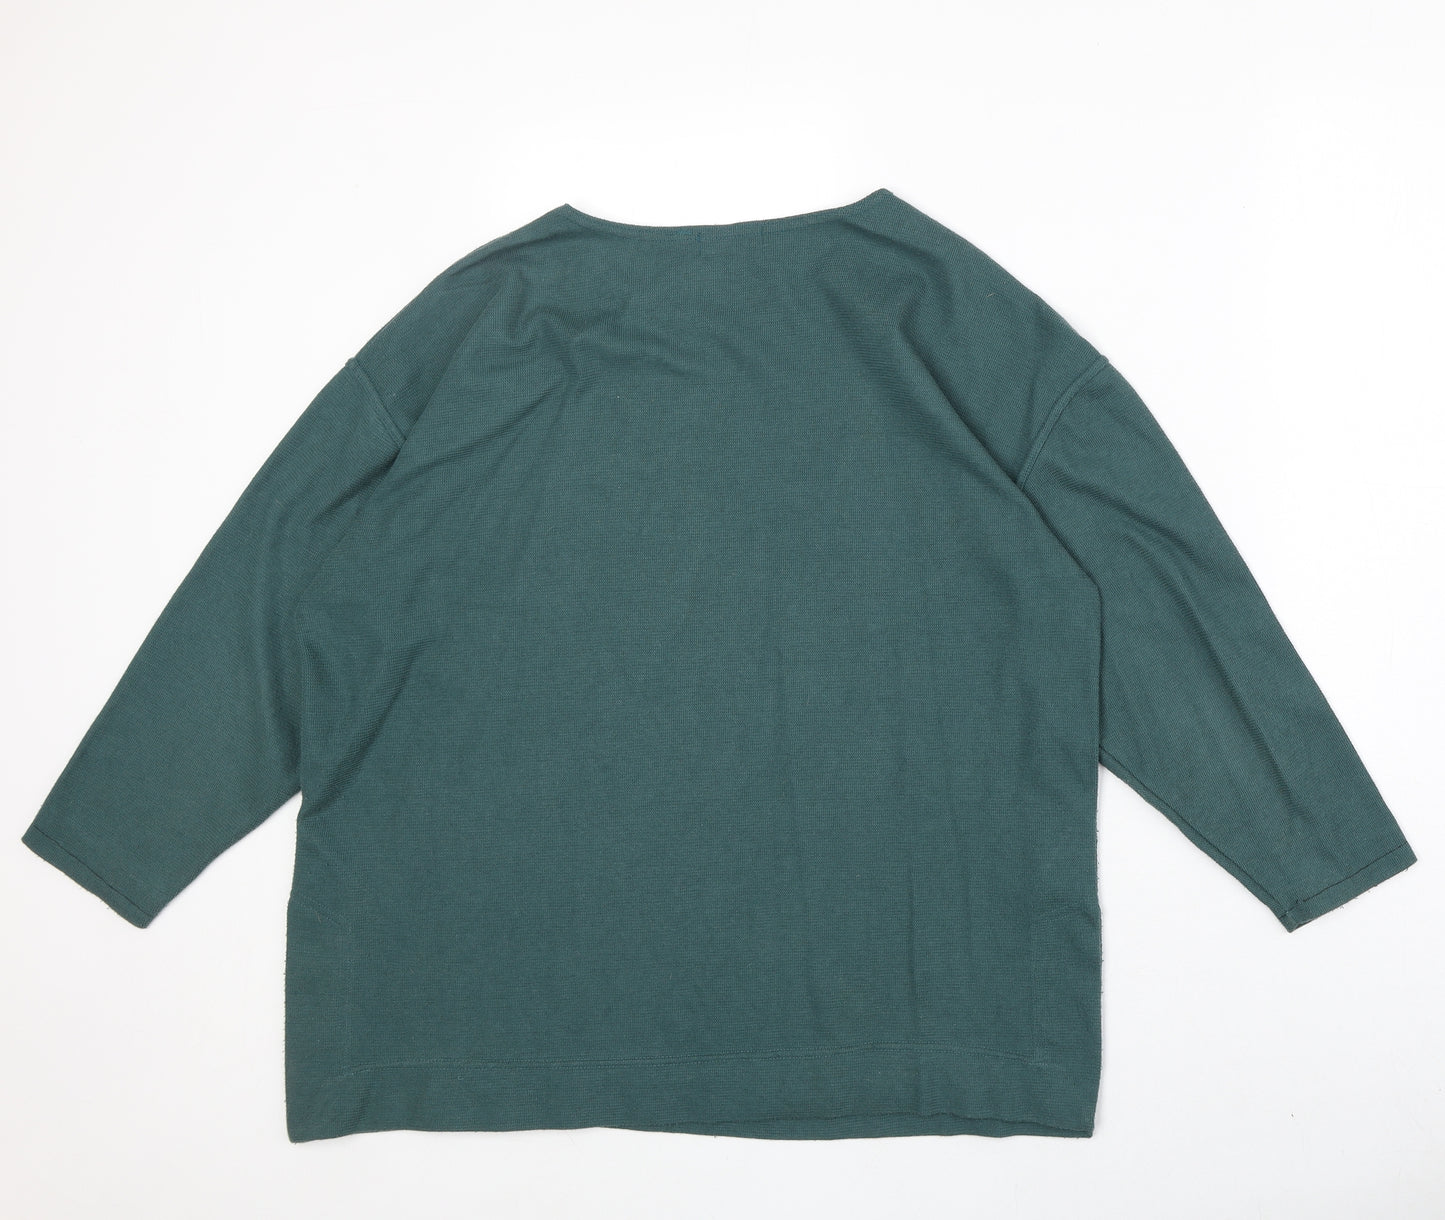 Fiore Womens Green Round Neck Polyester Pullover Jumper Size M